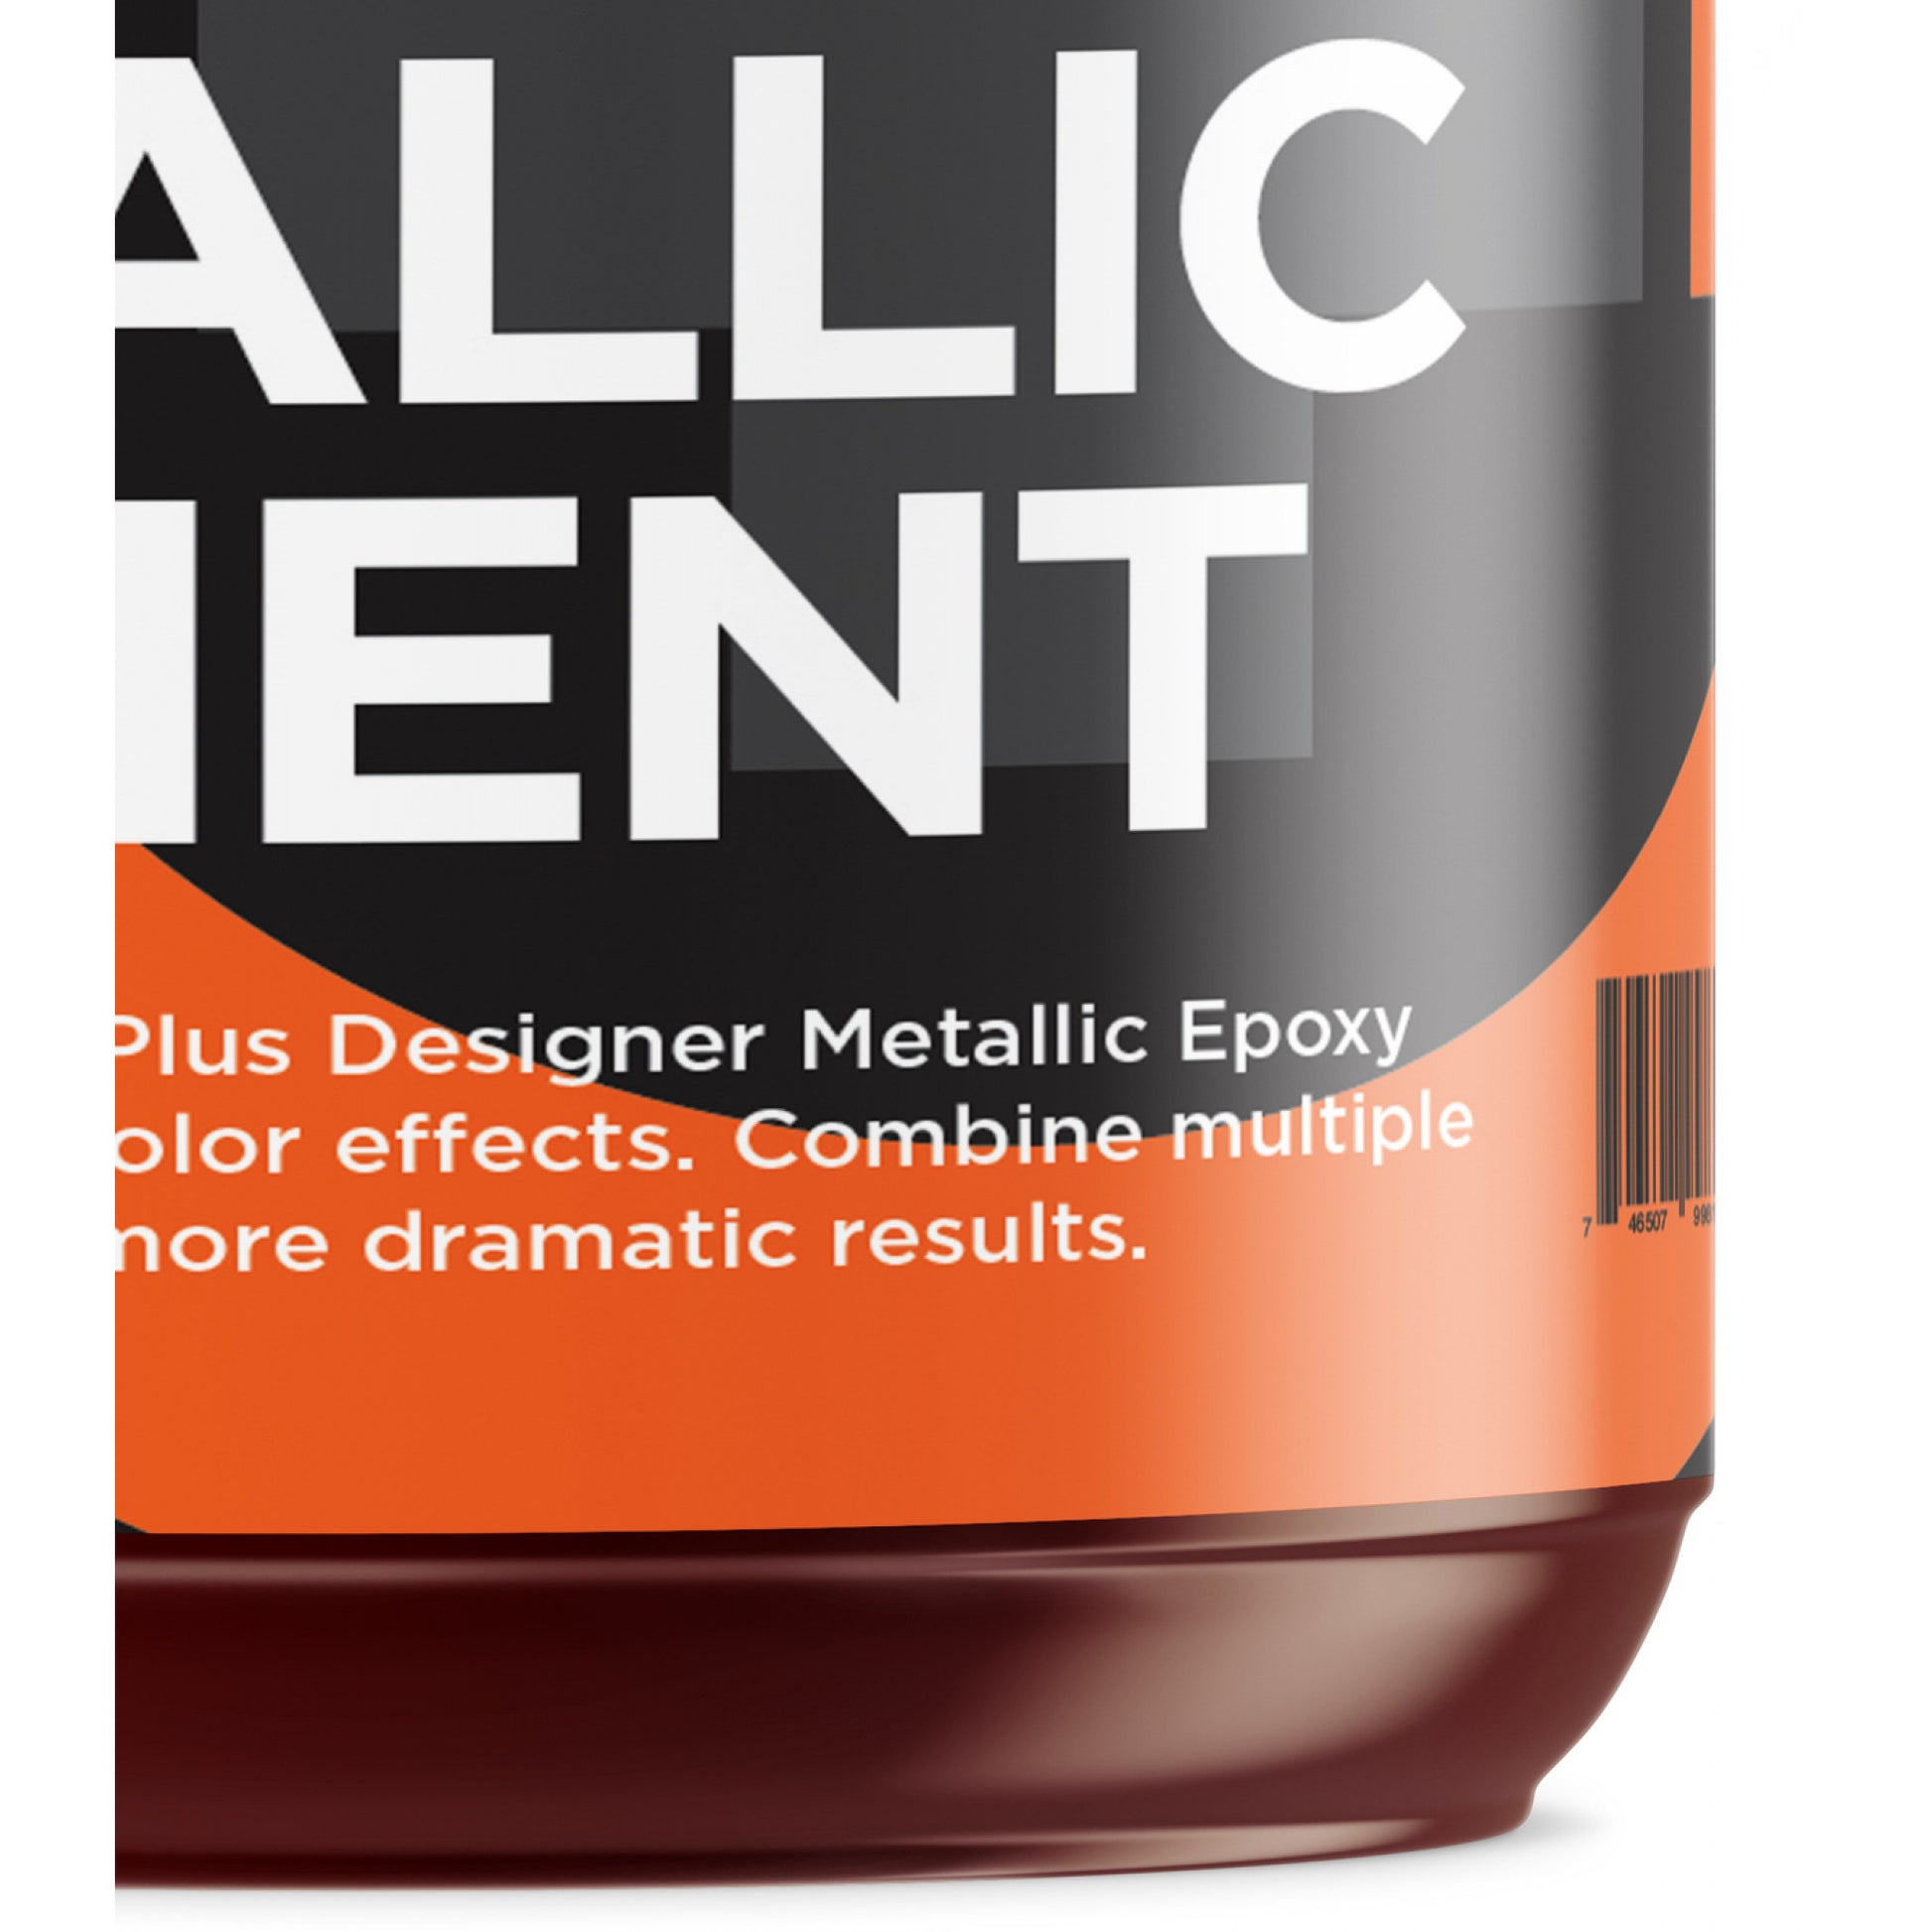 Rustic Elegance: PENNY METALLIC EPOXY PIGMENT - Transform Surfaces with Character